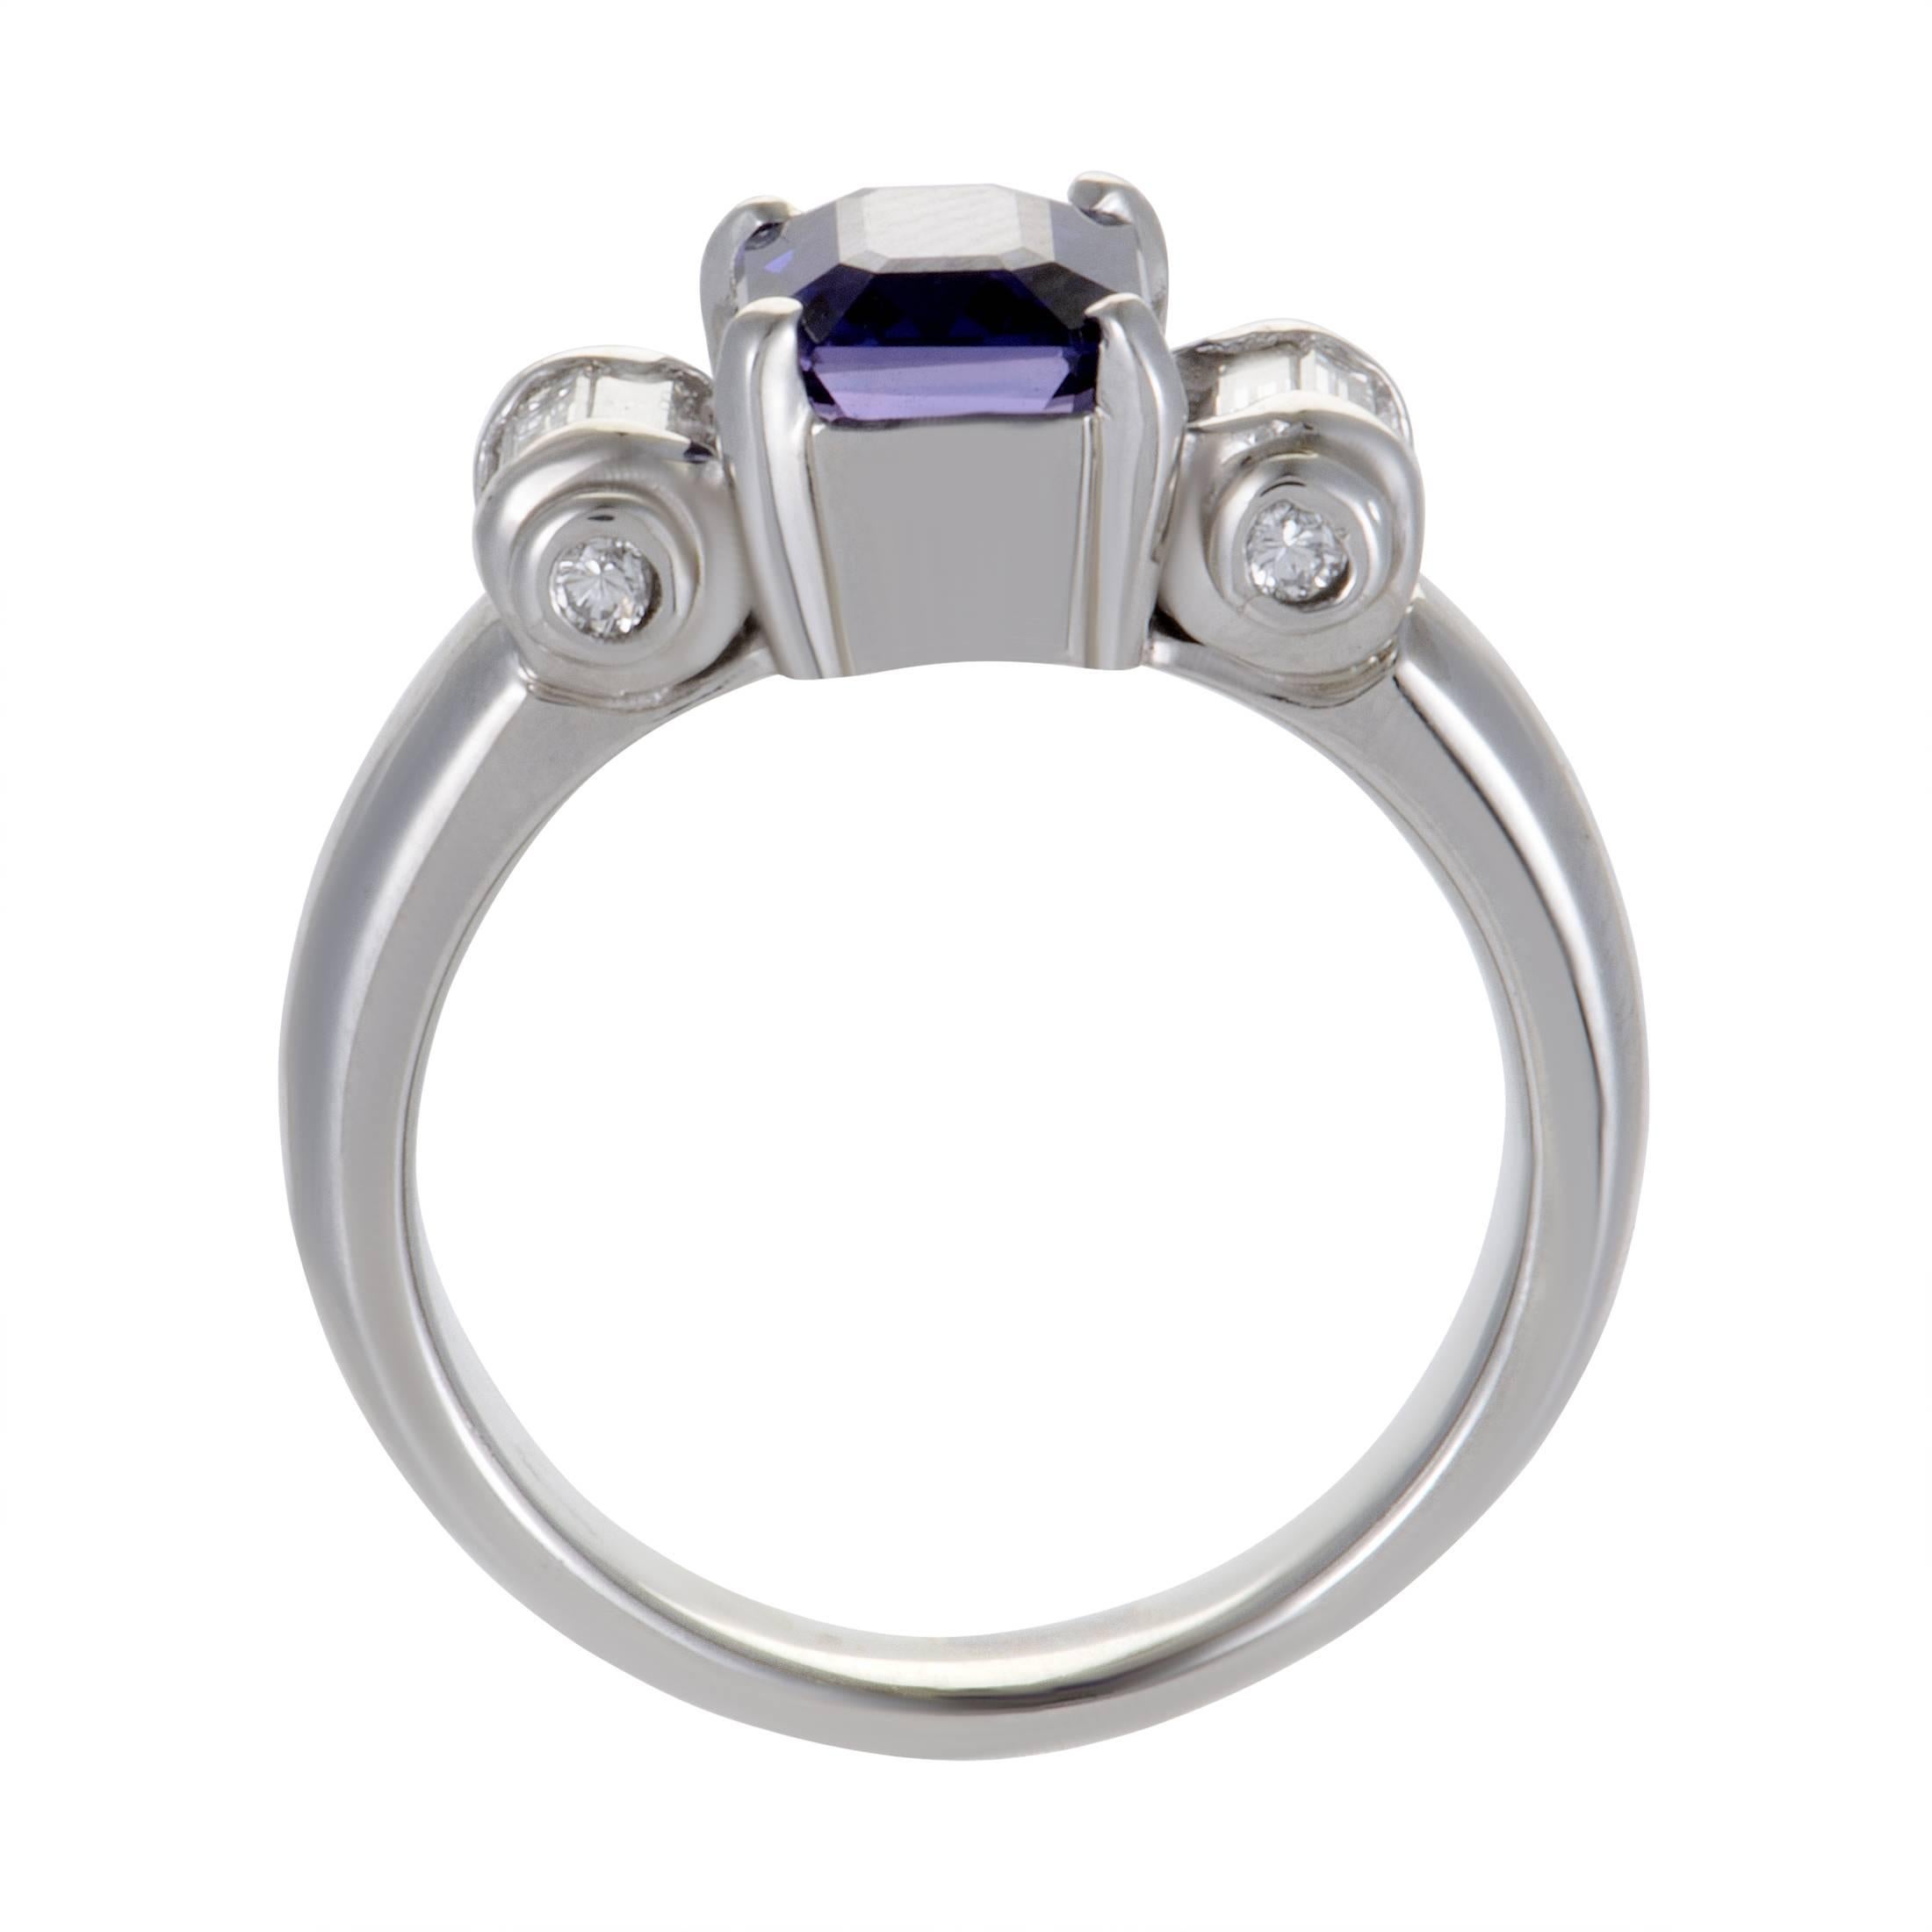 Classic, elegant design is given a sublime regal touch in this gorgeous ring made of prestigious platinum. The ring is set with 0.47 carats of diamonds and a superb purple sapphire that weighs 2.58 carats.
Ring Size: 6.25
Ring Top Dimensions: 13mm x